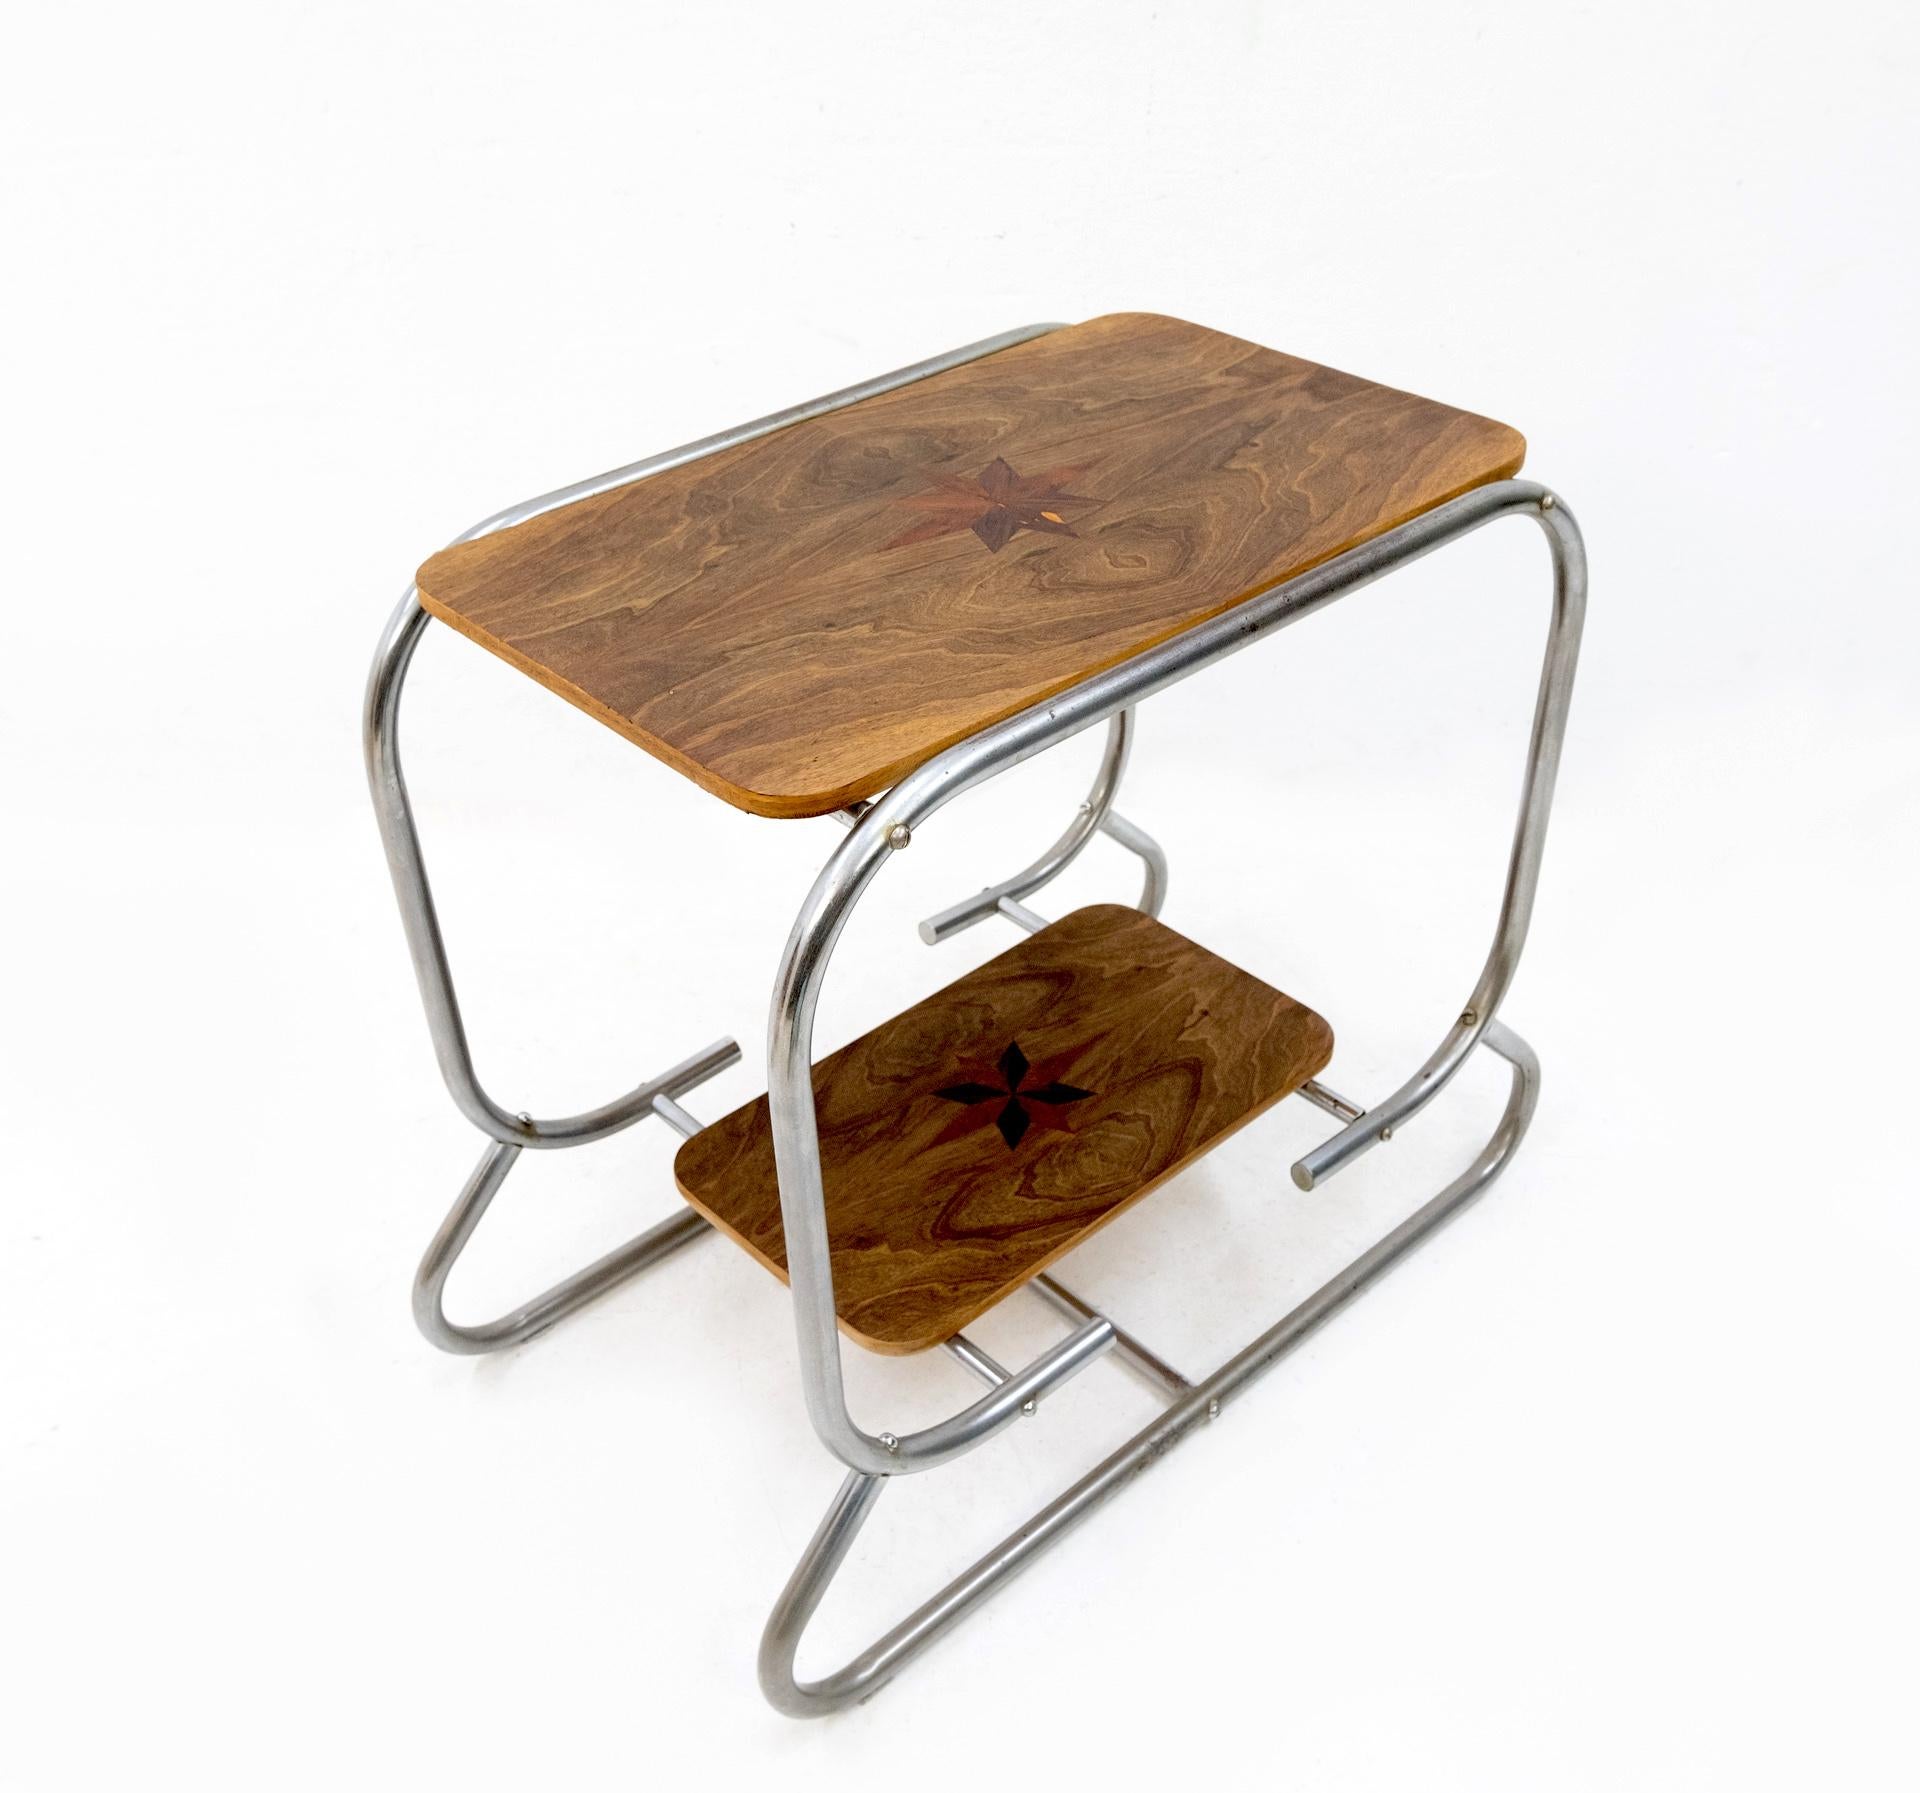 Art Deco two-tier side table. Chrome tube frame comes with walnut tops. With star
shaped intarsia, made off mahogany. Some damage on the top. See photo. Bauhaus, 1920-1930.